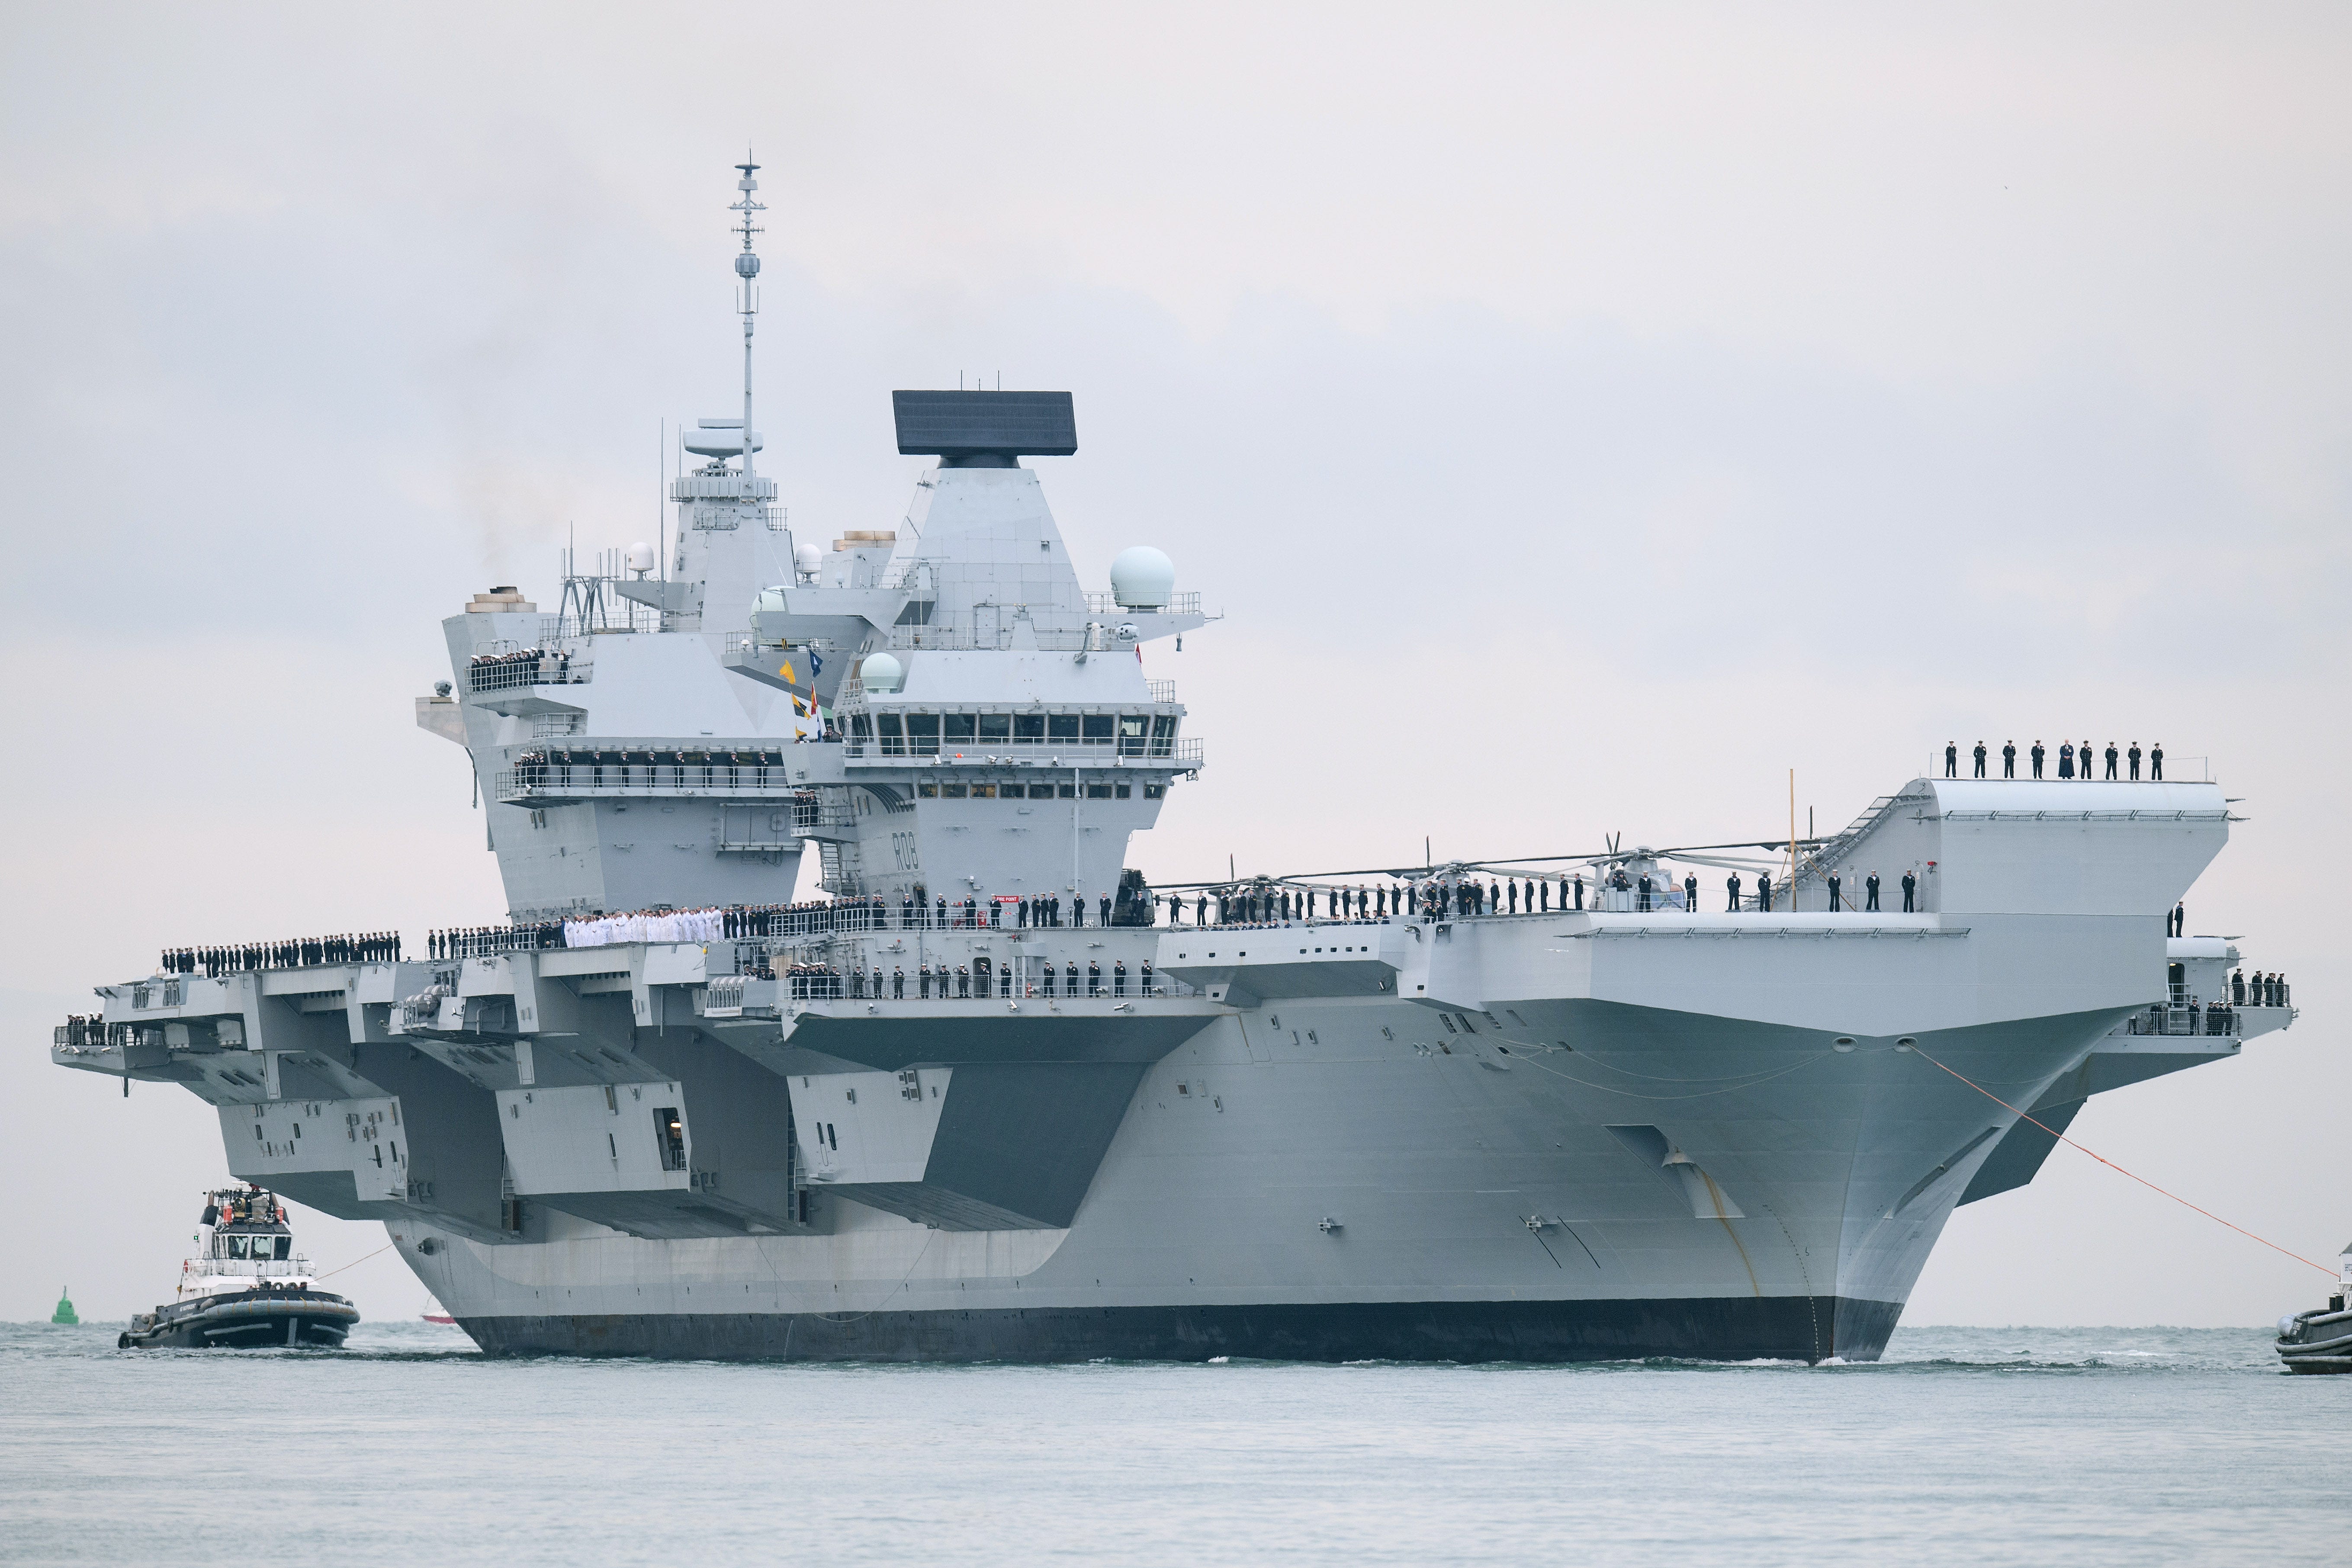 COVID-19 infects about 100 vaccinated crewmembers on HMS Queen Elizabeth: report